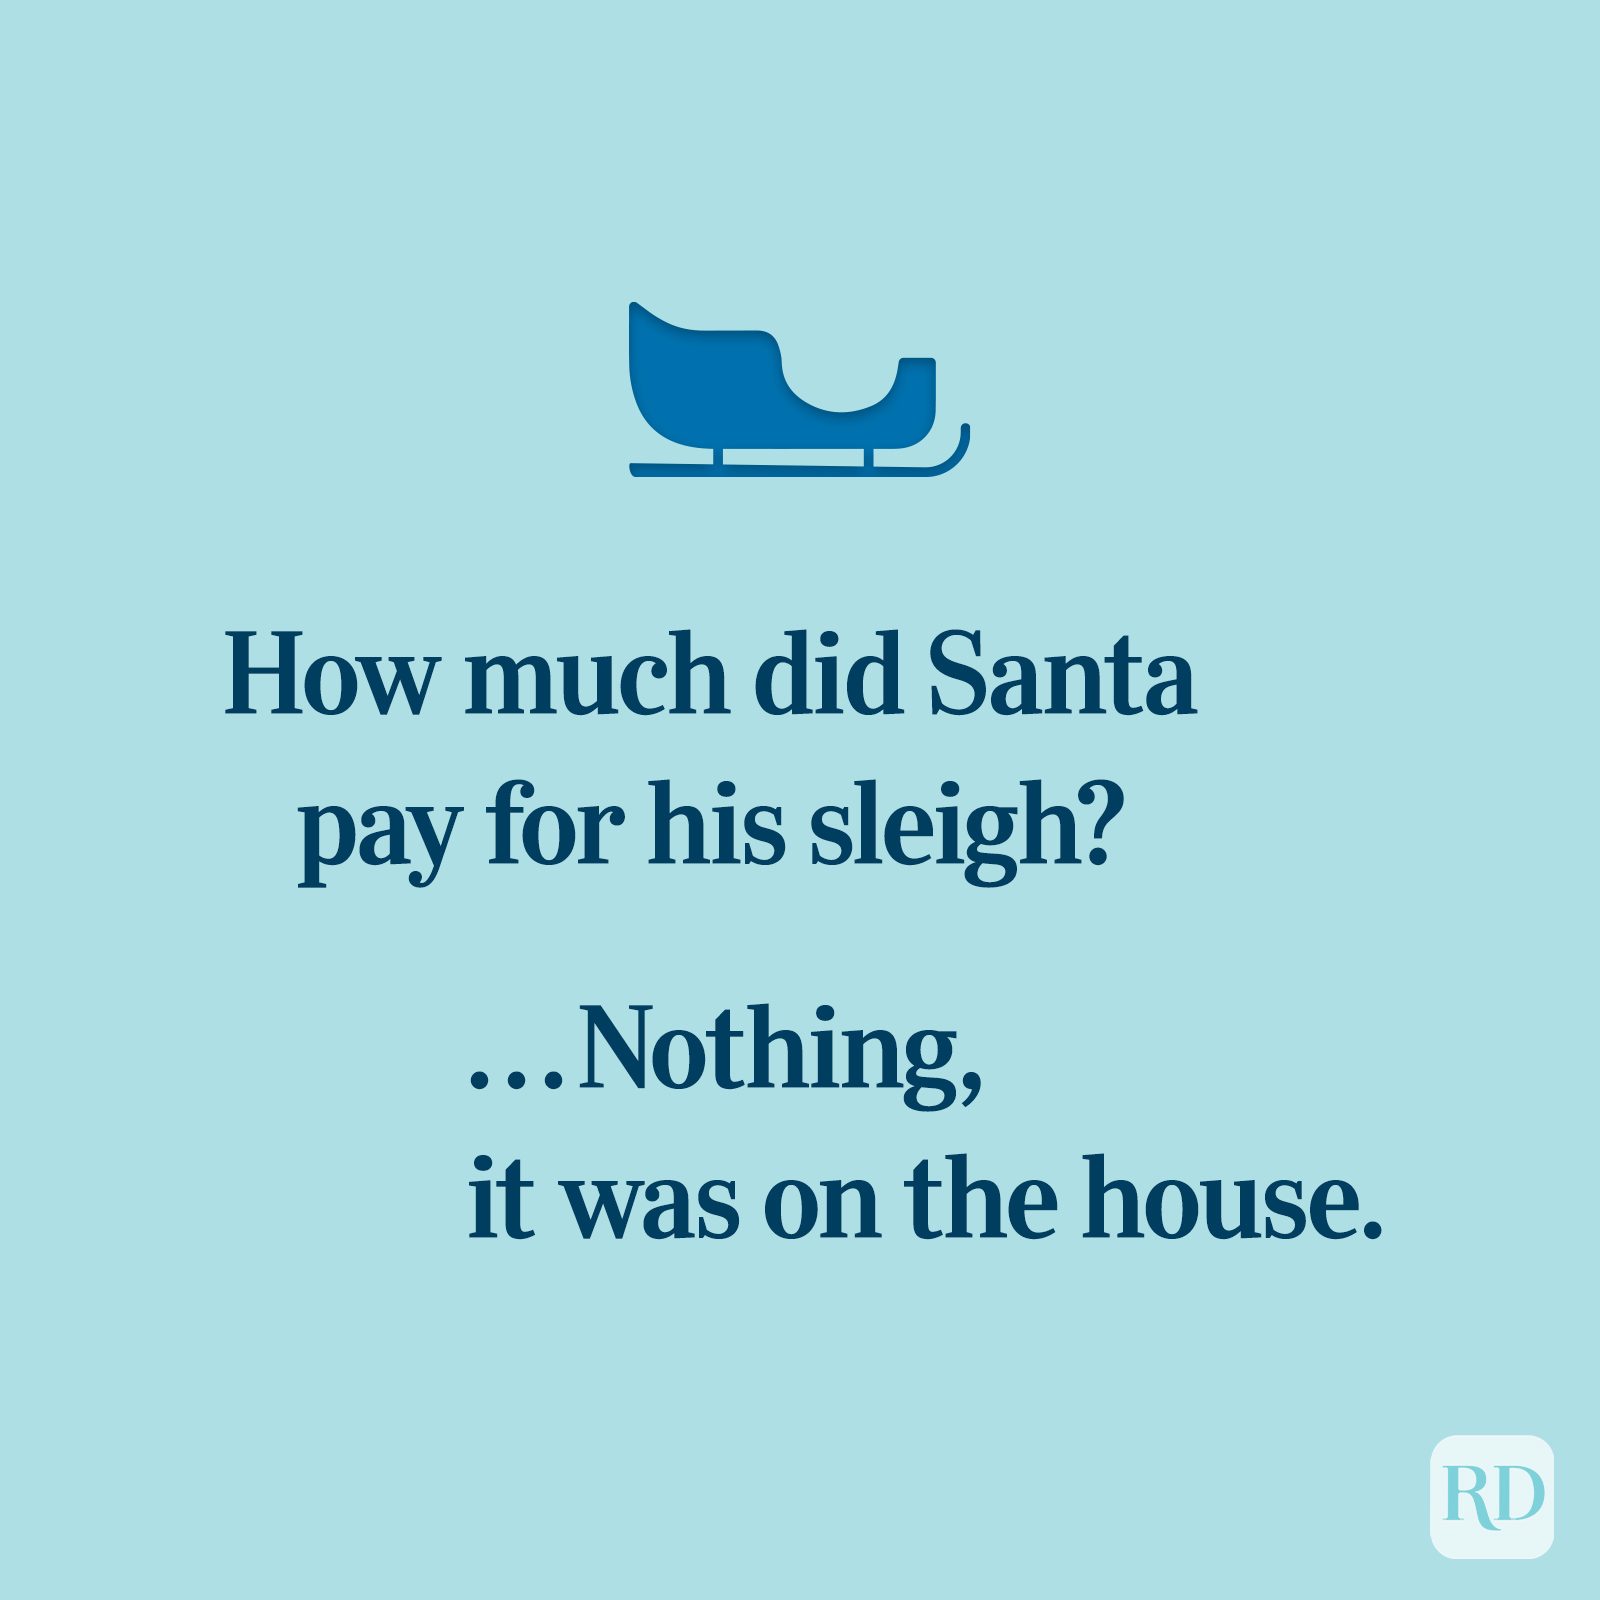 100 Funniest Quotes 2021 Sleigh 0